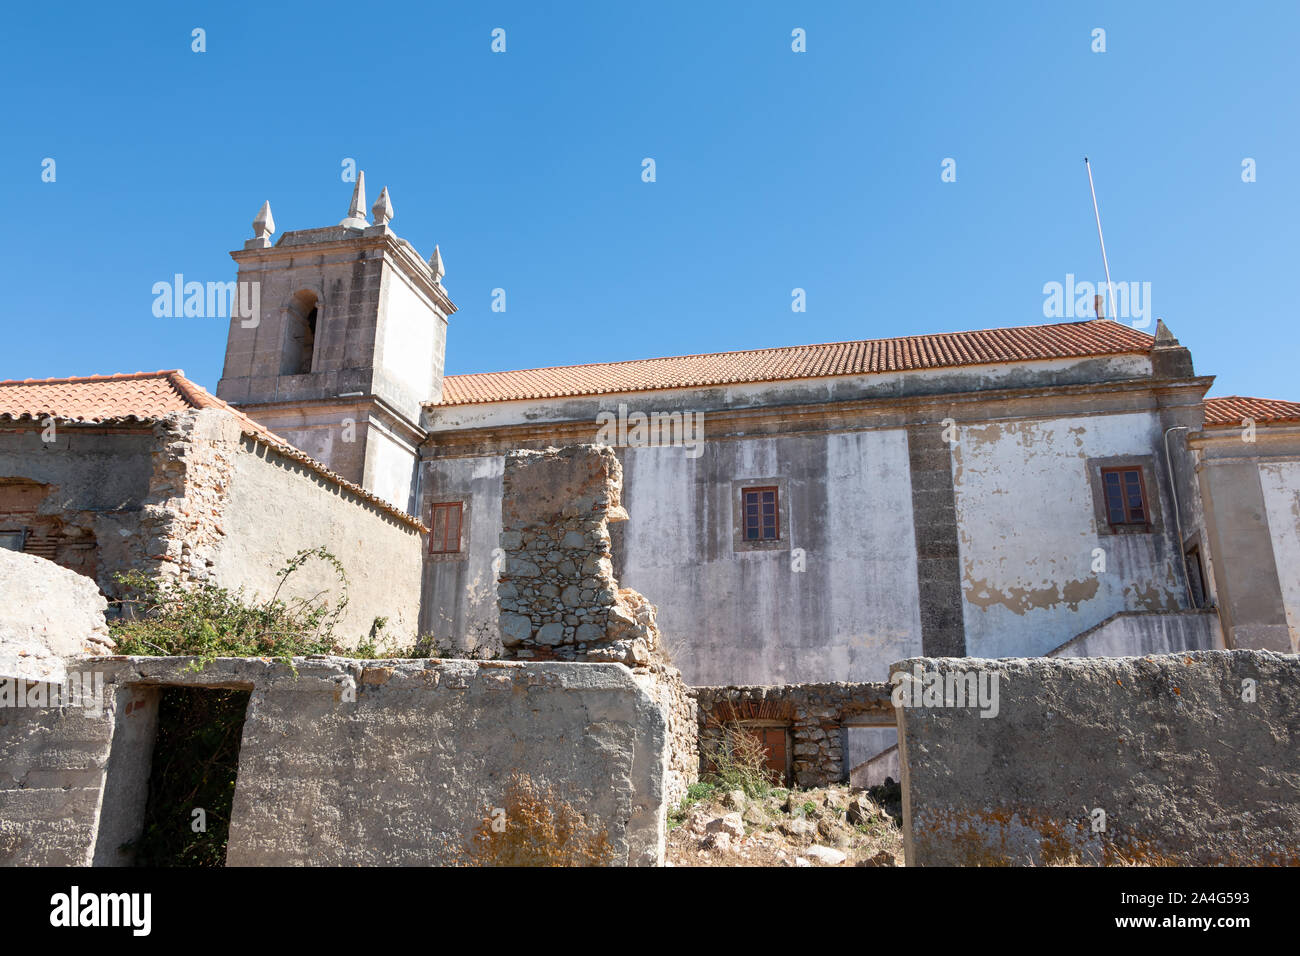 Cape Espichel near Sesimbra, Portugal - August 8, 2018: Architectural detail of the Cape Espichel sanctuary on a summer day. The Baroque church is bui Stock Photo